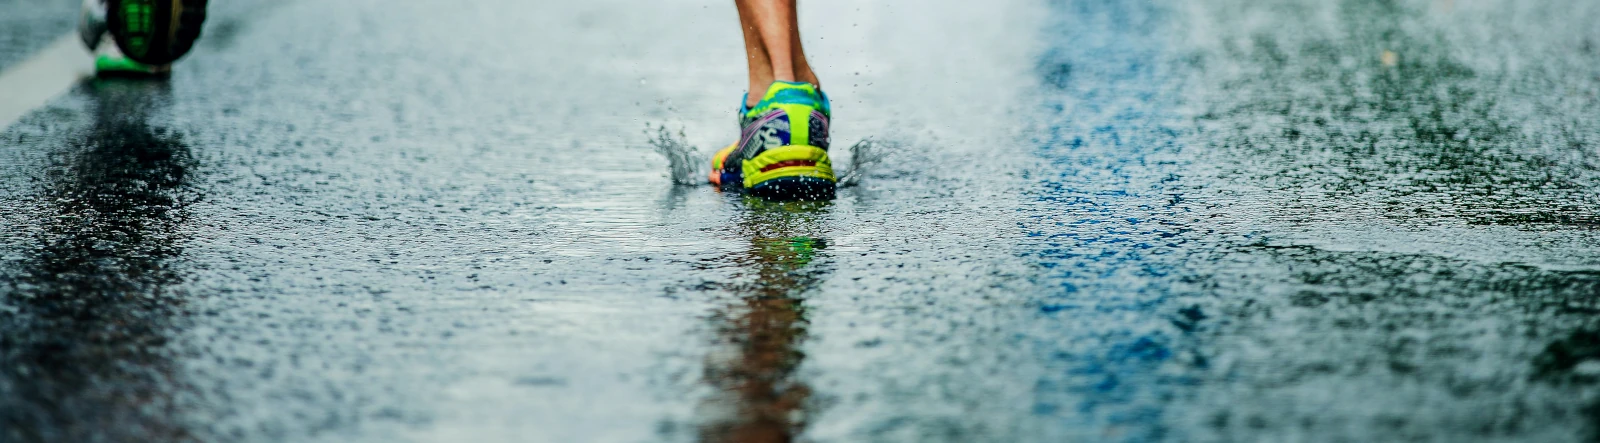 A runner's shoe landing on wet tarmac and making a small splash